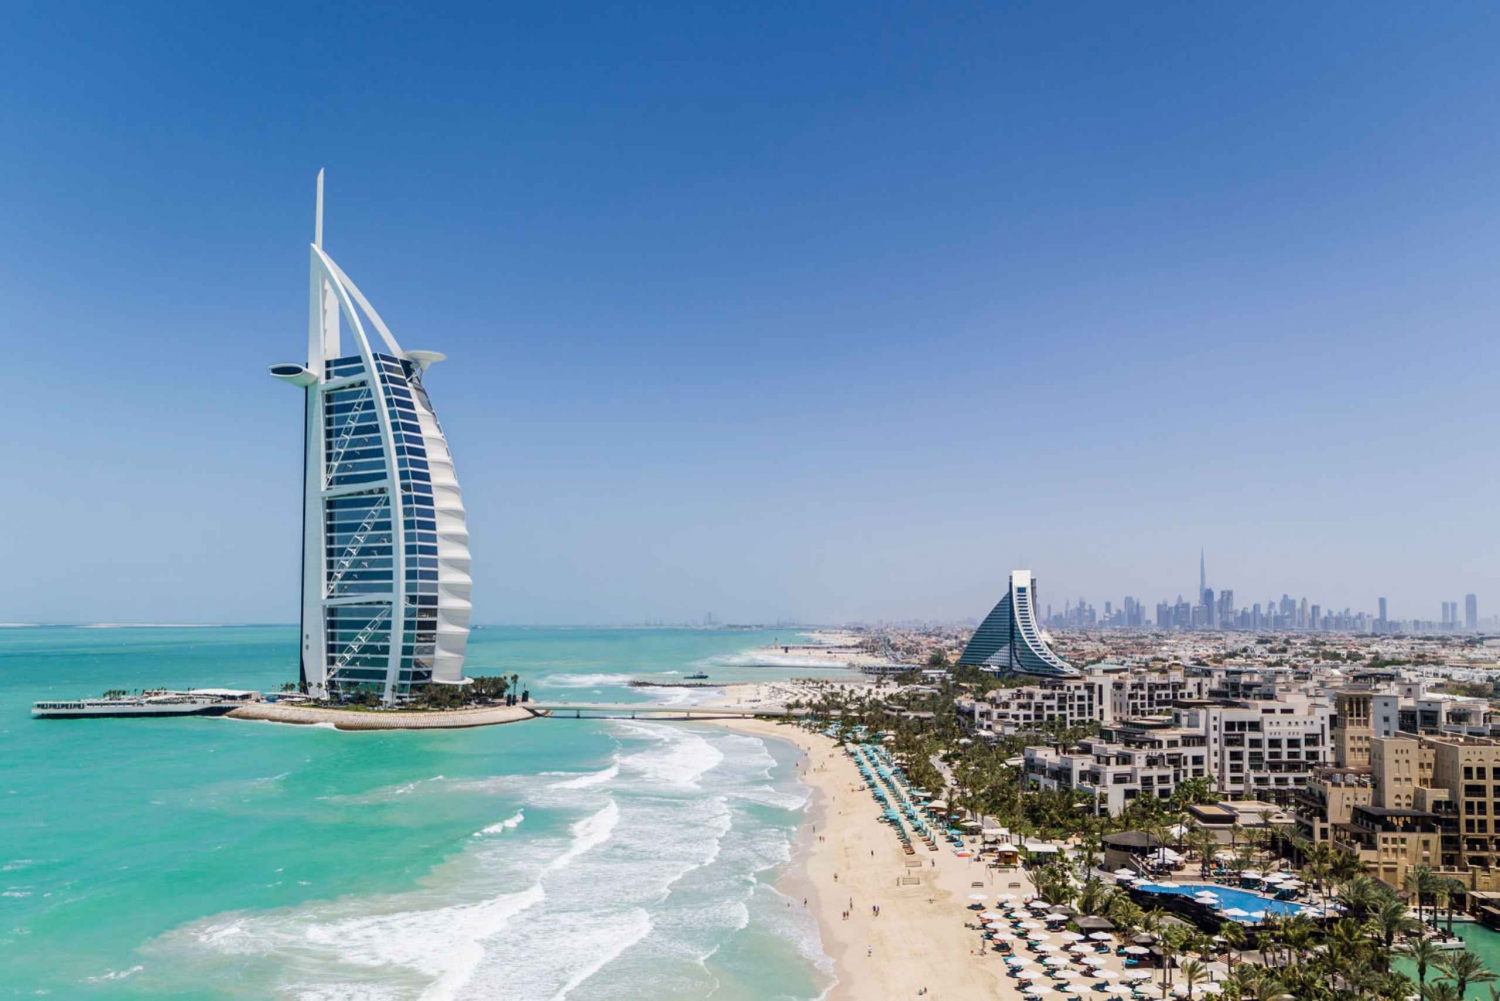 Dubai: Half-Day Sightseeing Tour with Photo Stops by Bus